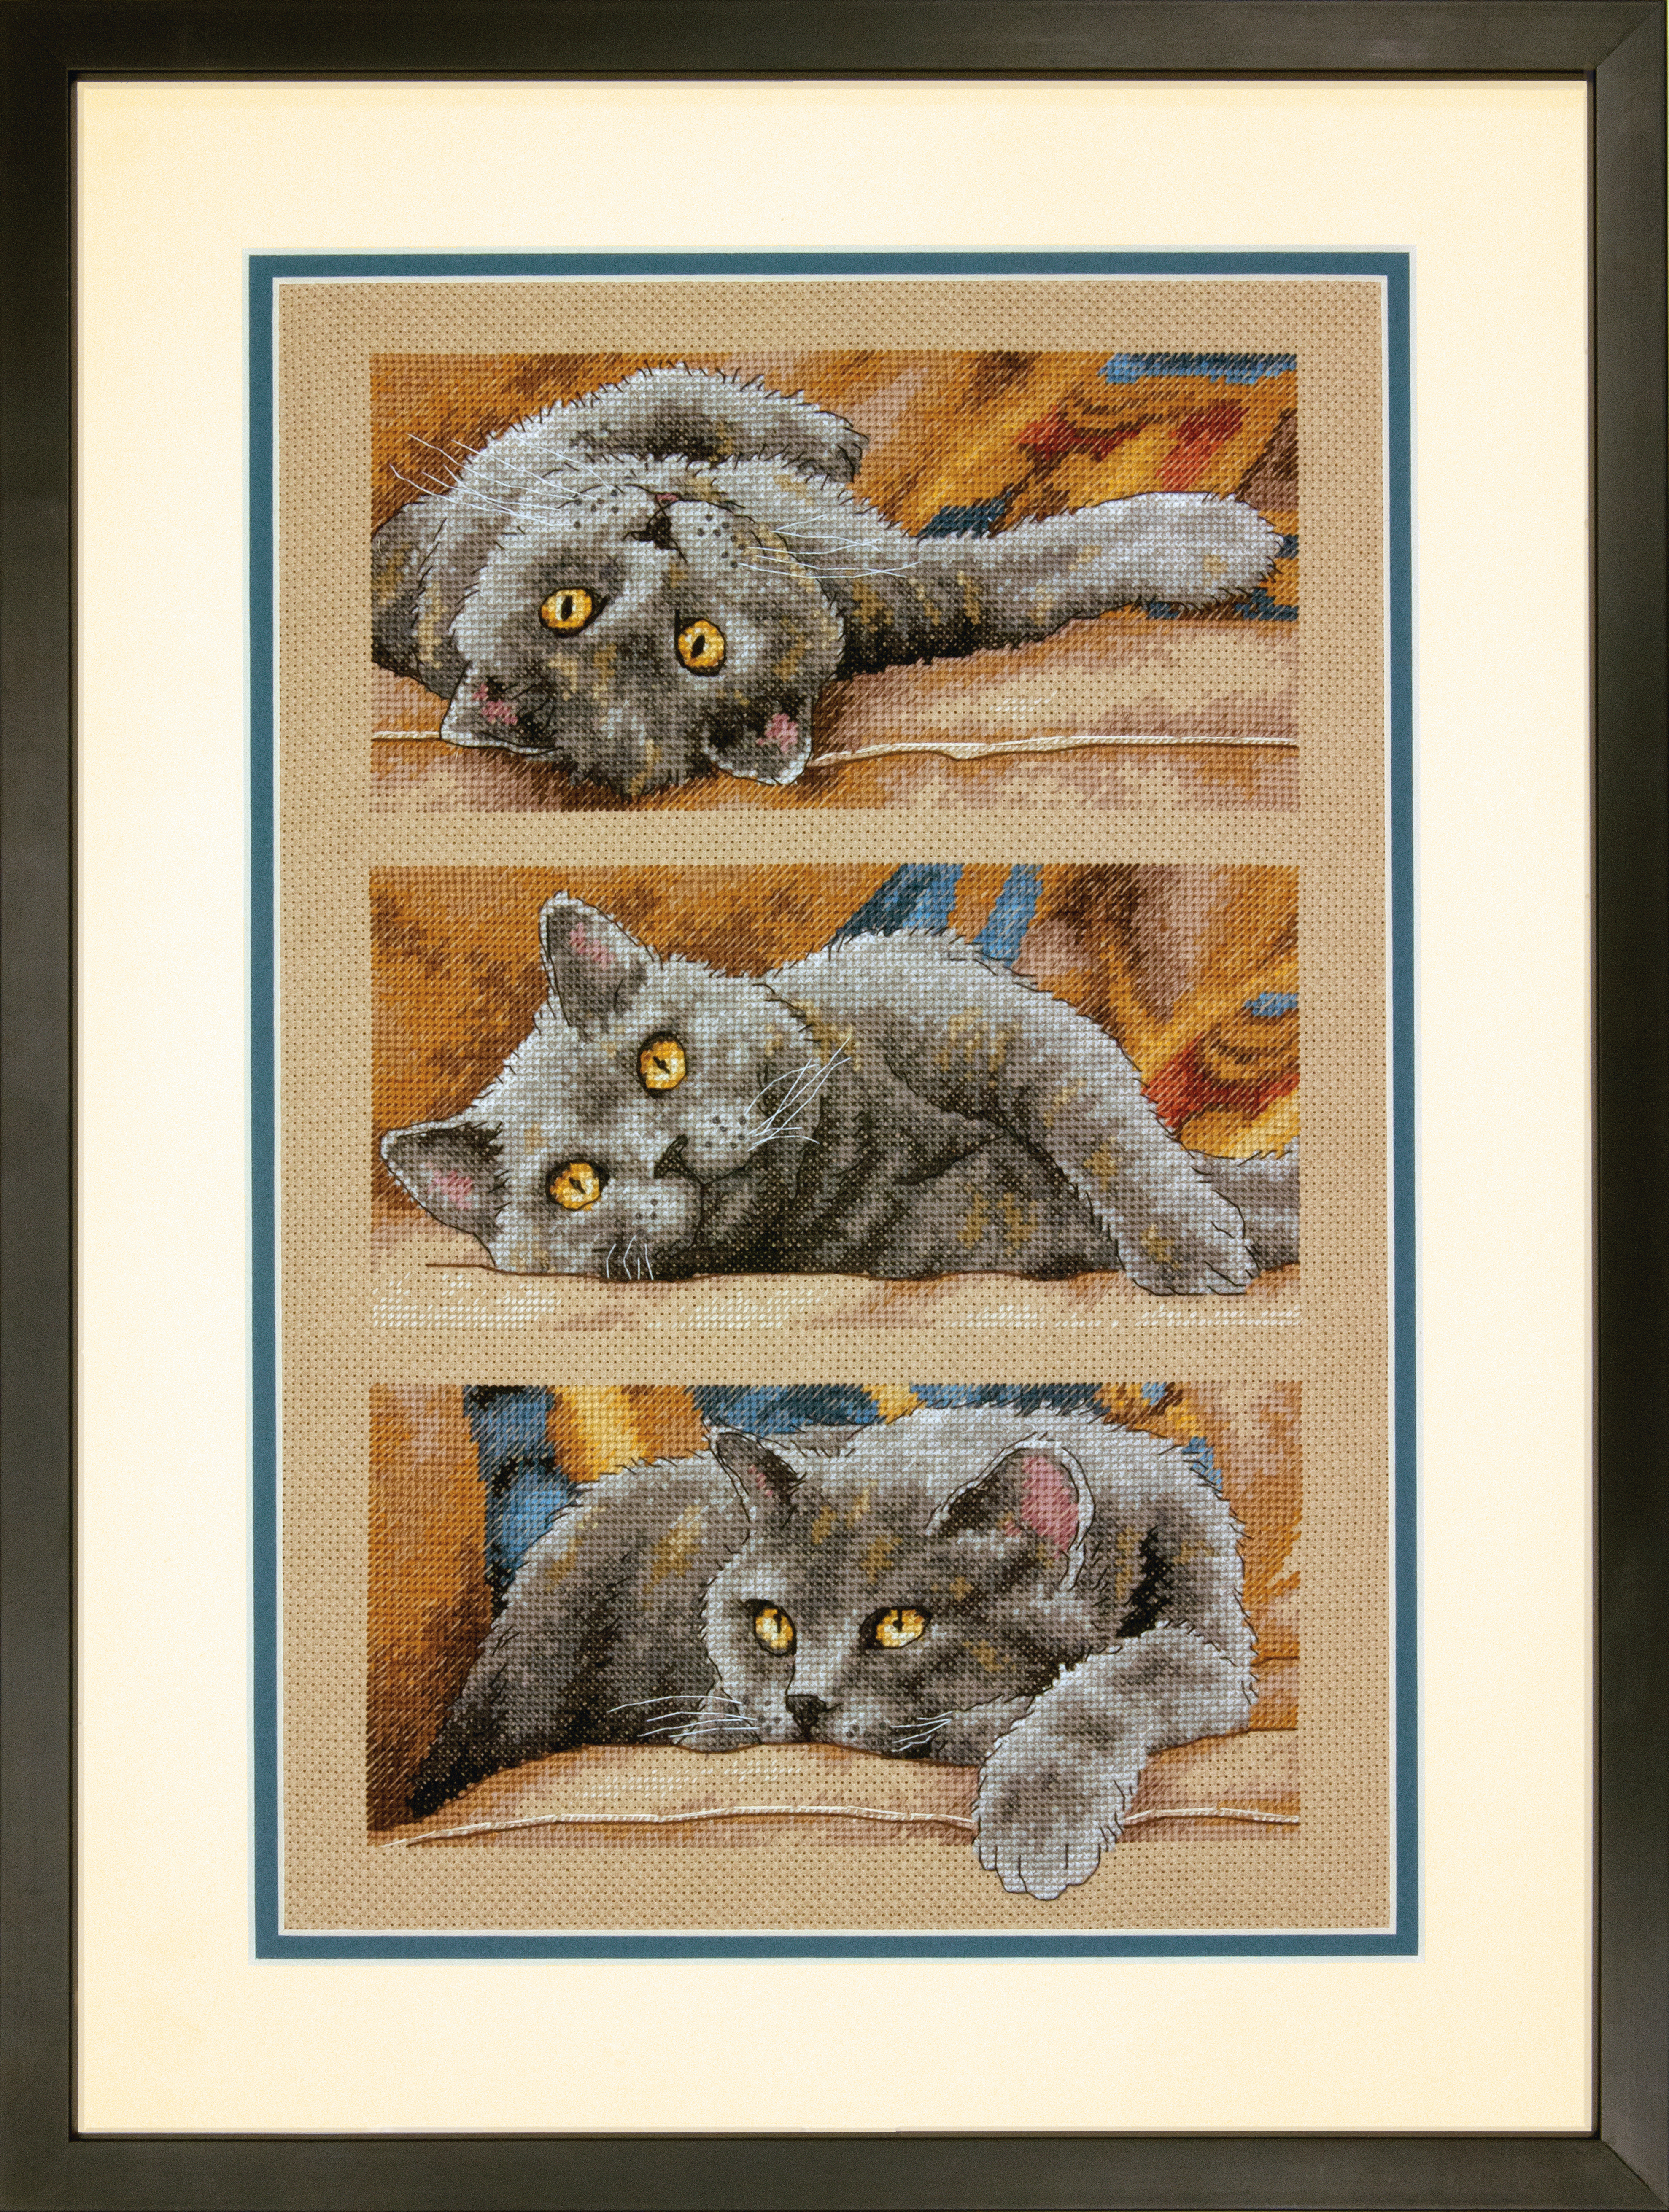 Dimensions Counted Cross Stitch Kit: Max The Cat - Afbeelding 1 van 1